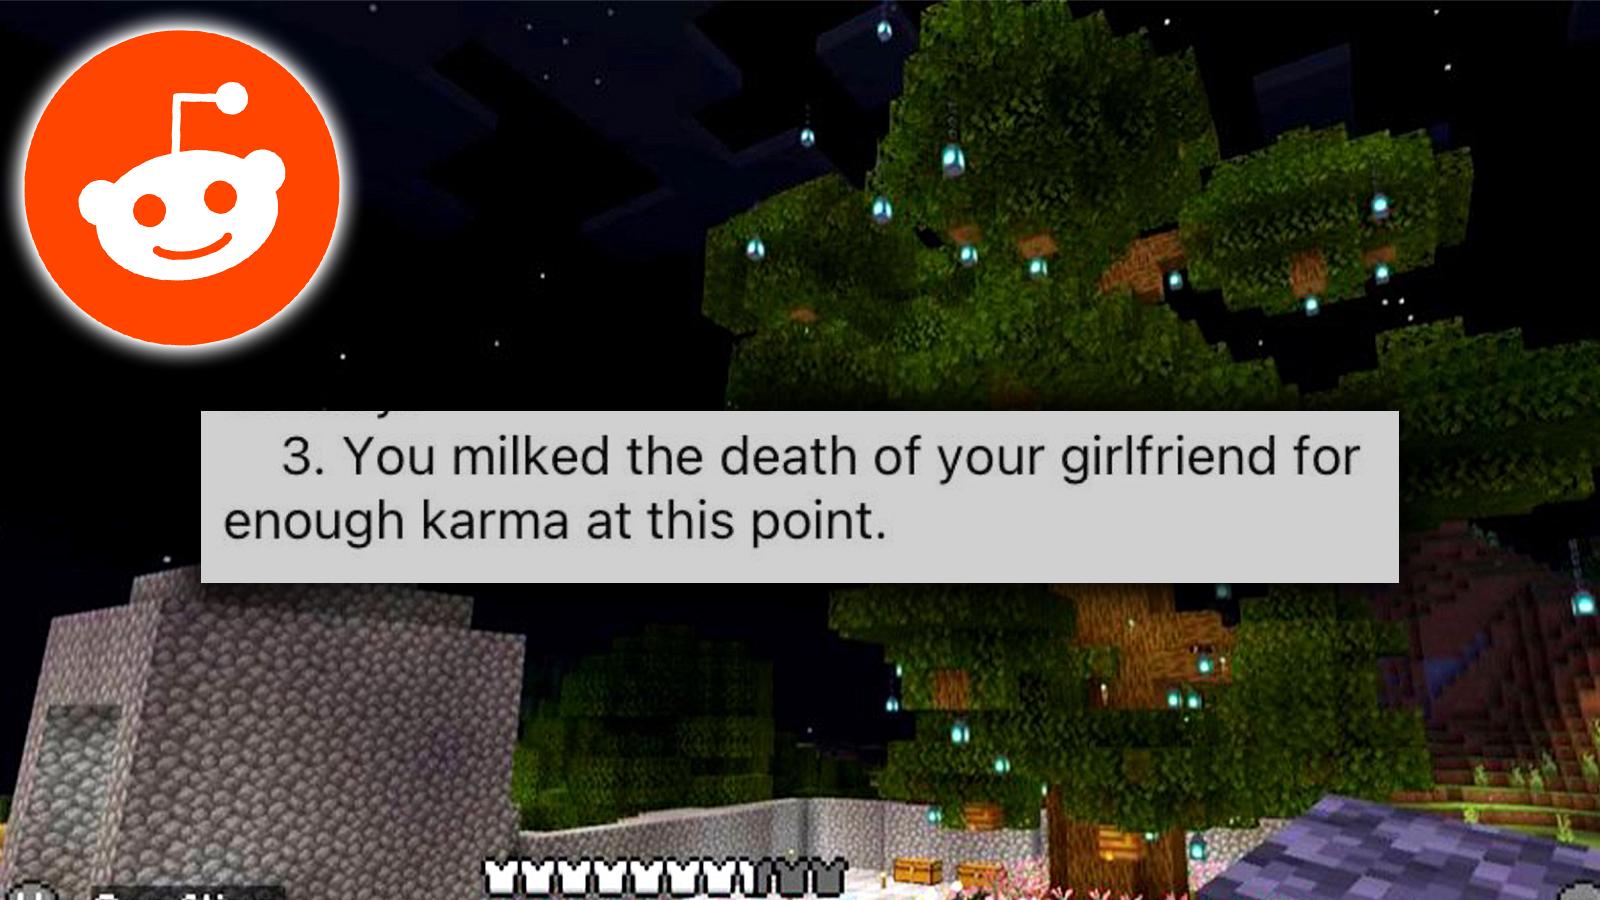 Minecraft reddit mod under fire for telling user he mliked girlfriends death for karma